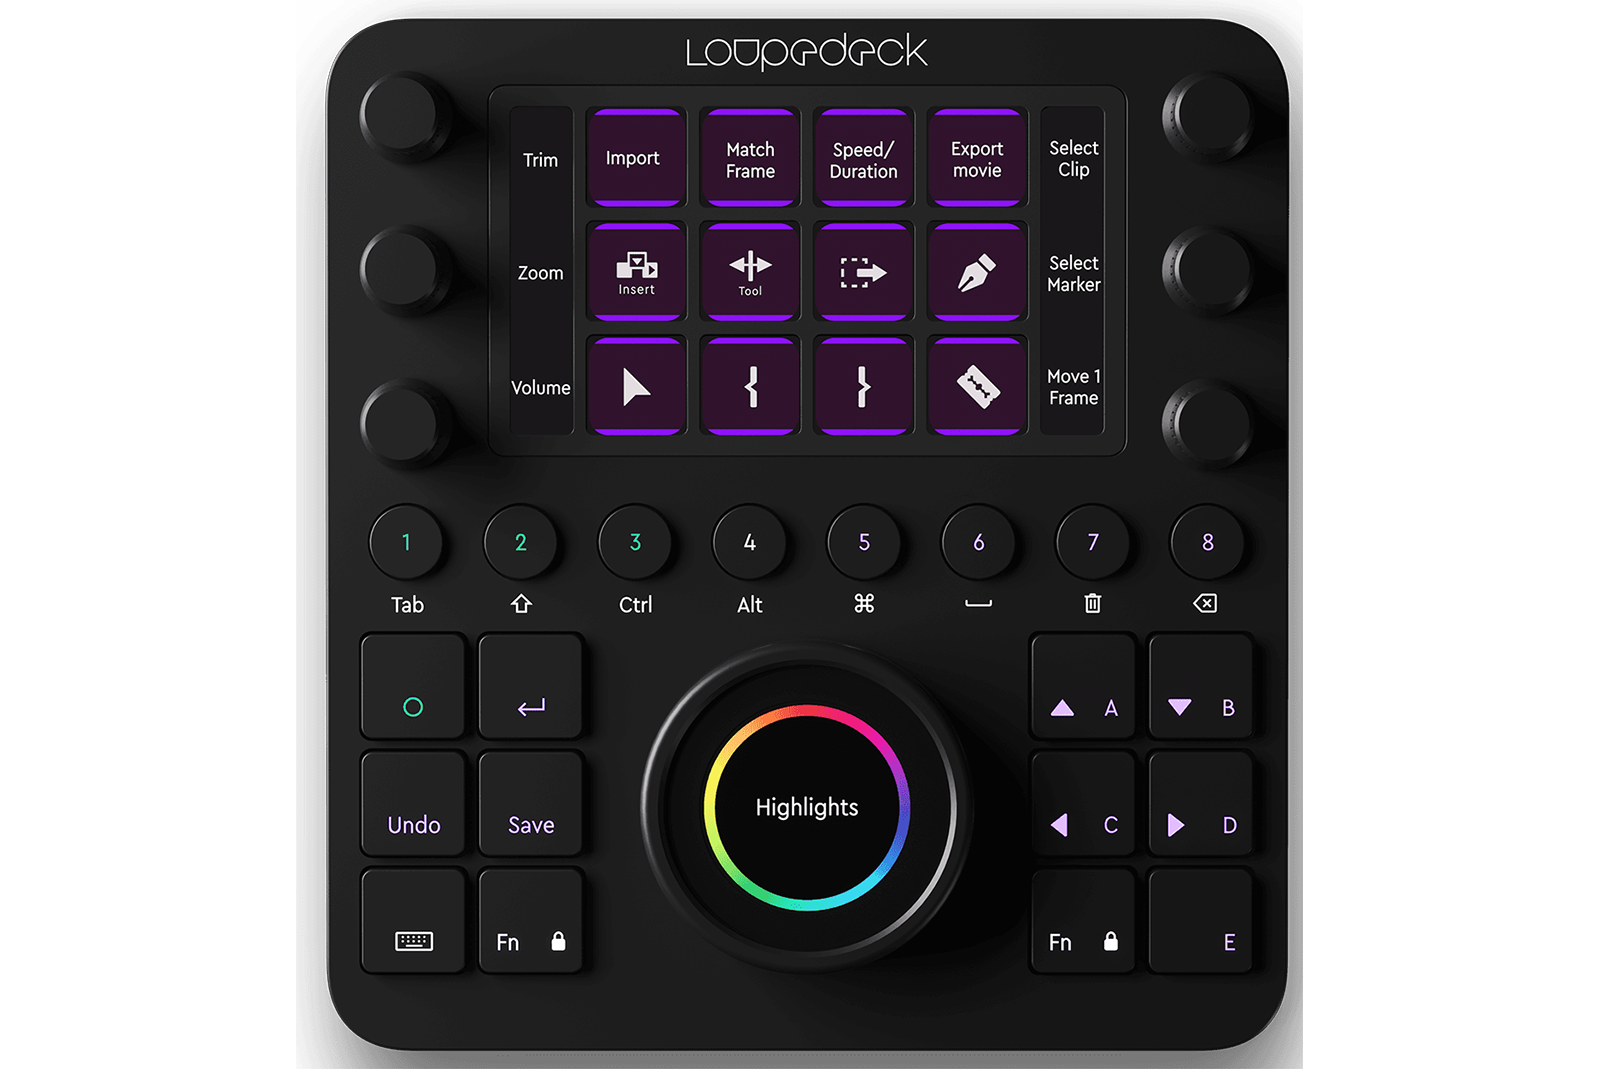 Loupedeck Ct Vs Stream Deck For Upping Final Cut Pro X Productivity Both Save Time Zdnet